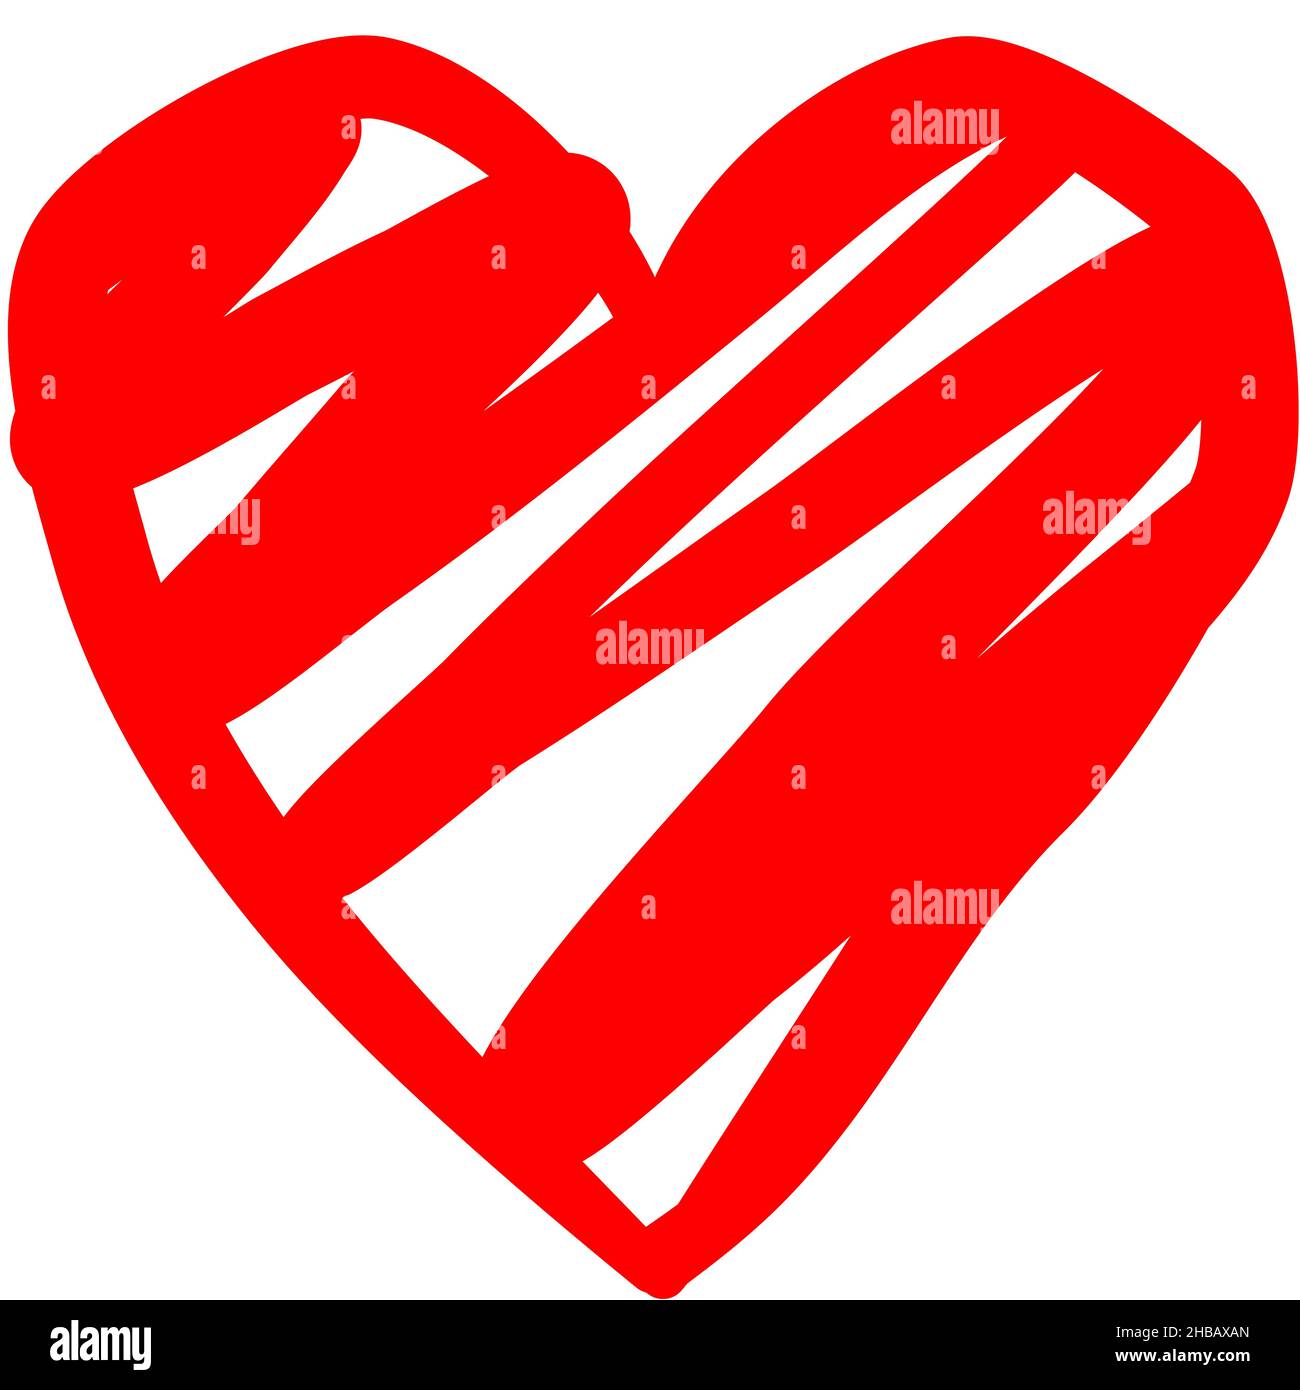 Heart shape red drawing - sign symbol icon isolated - vector illustration Stock Vector